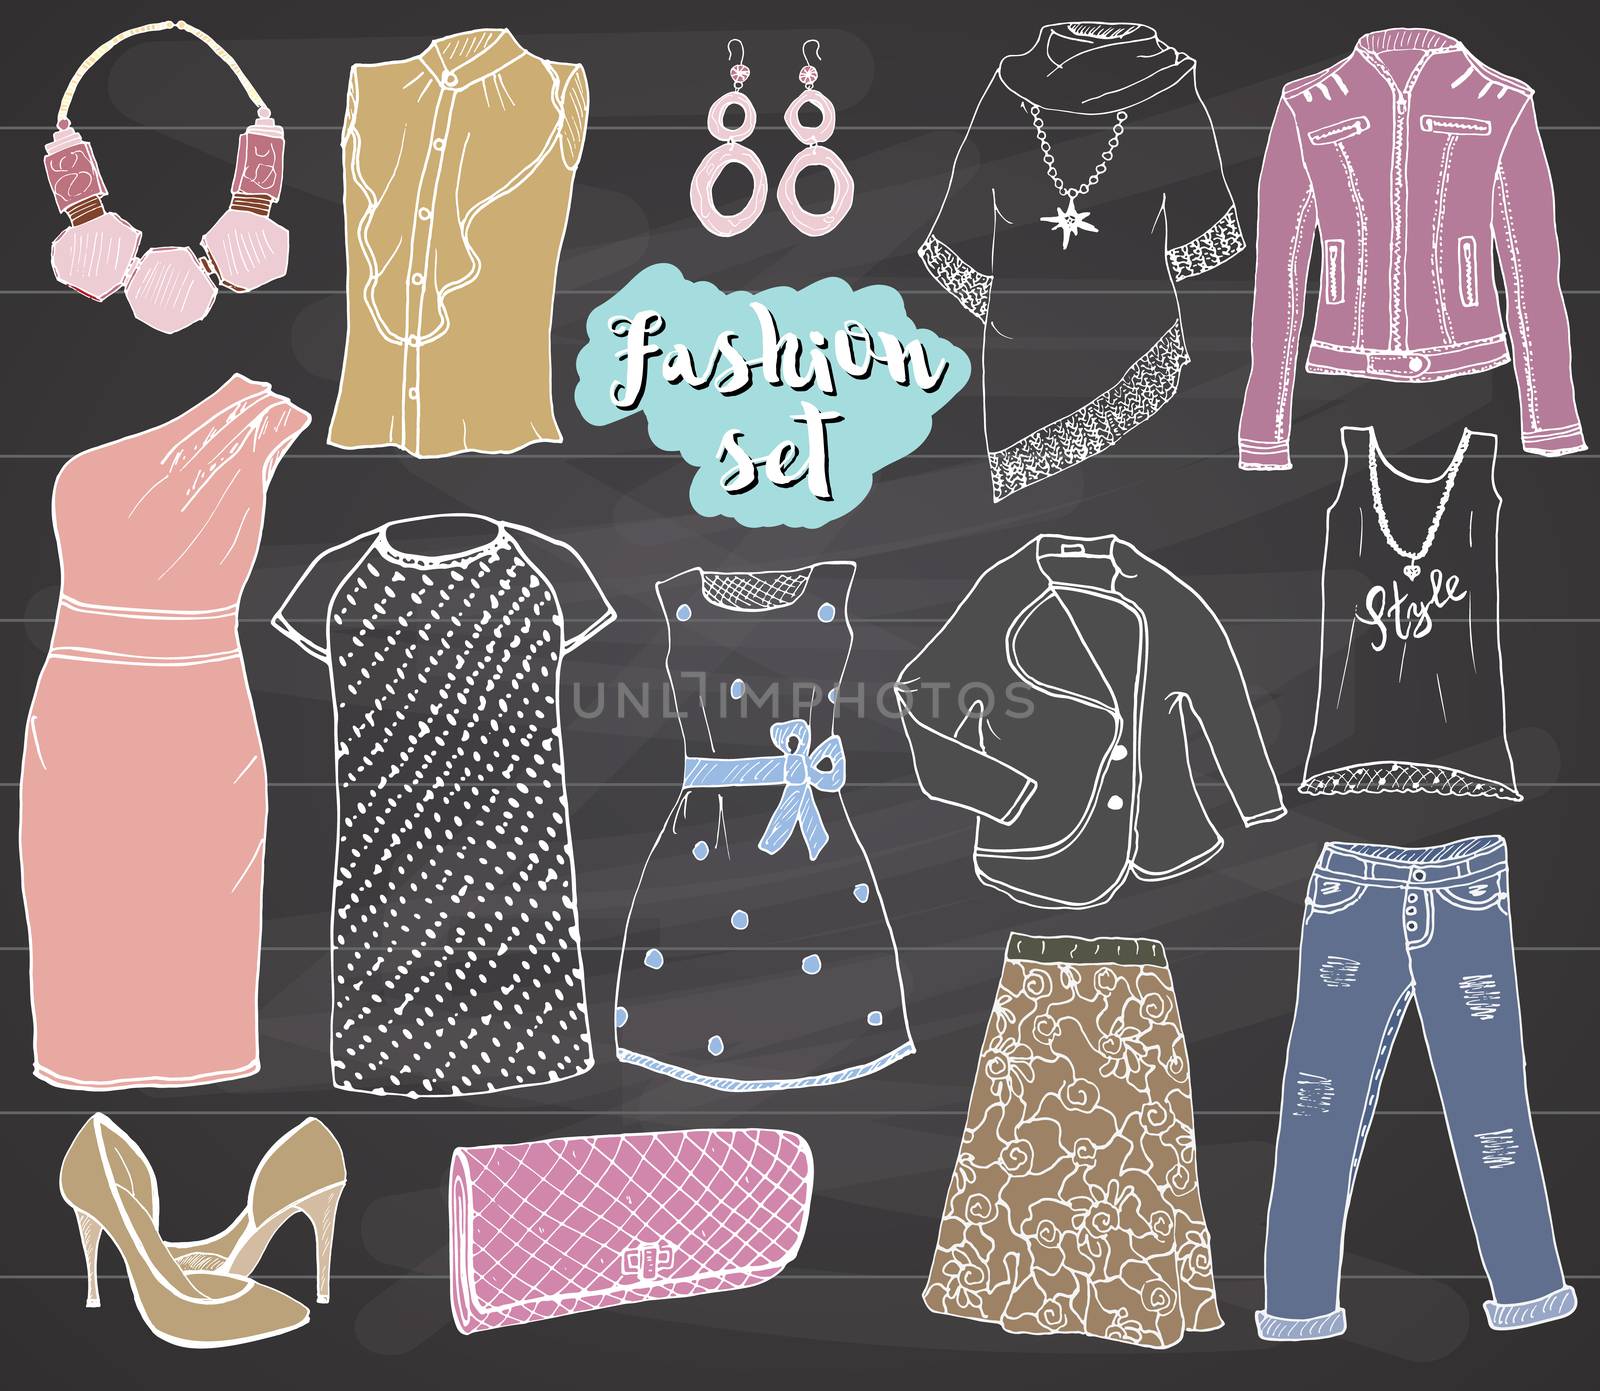 Fashion collection Doodles set. Hand Drawn Sketch with dress shoes, pants and jacket, handbag and accessories vector Illustration Design Elements on chalkboard Background.